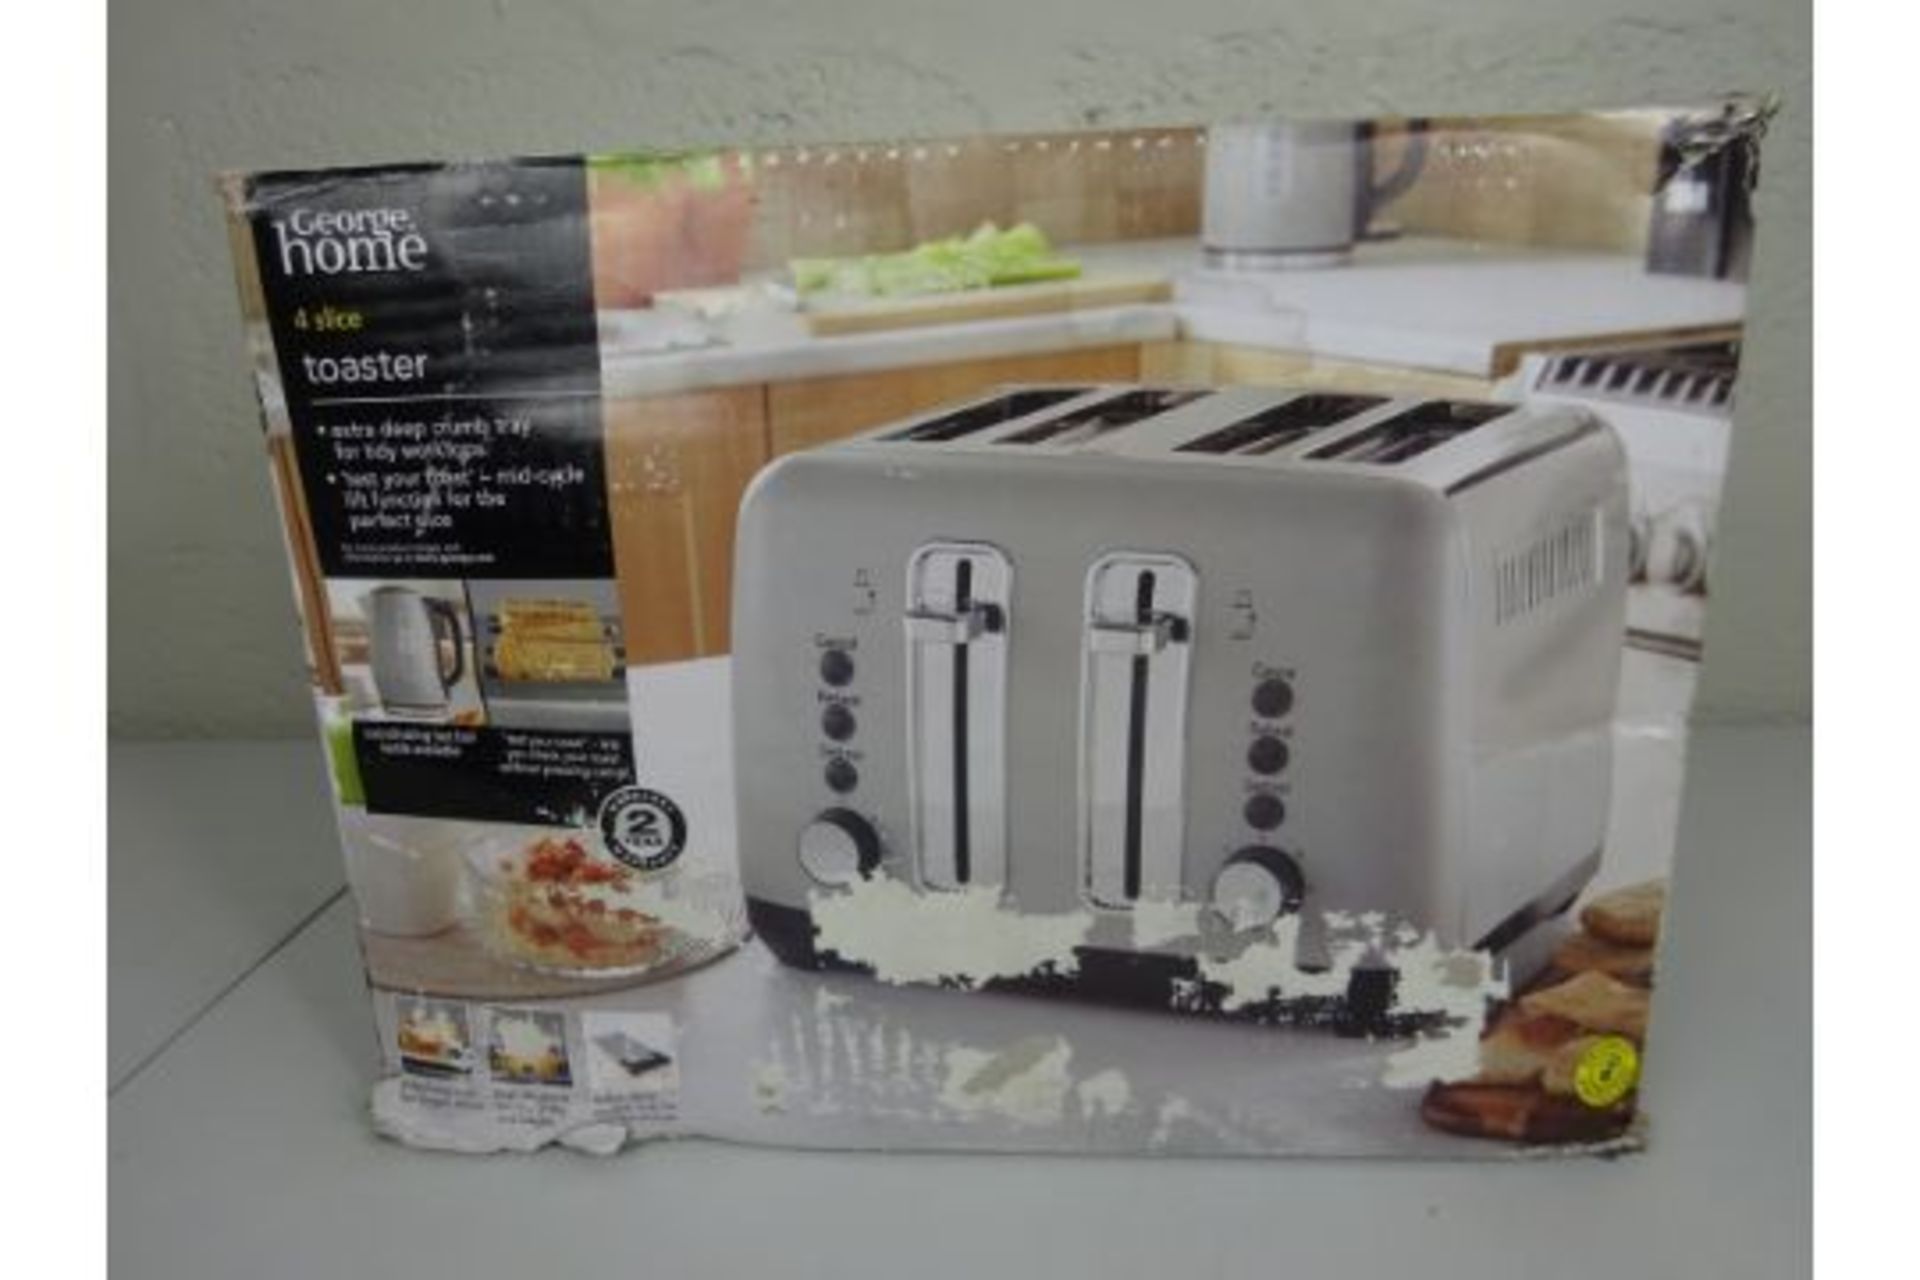 GRADE A George at Home 4 Slice Toaster - Grey - RRP £25